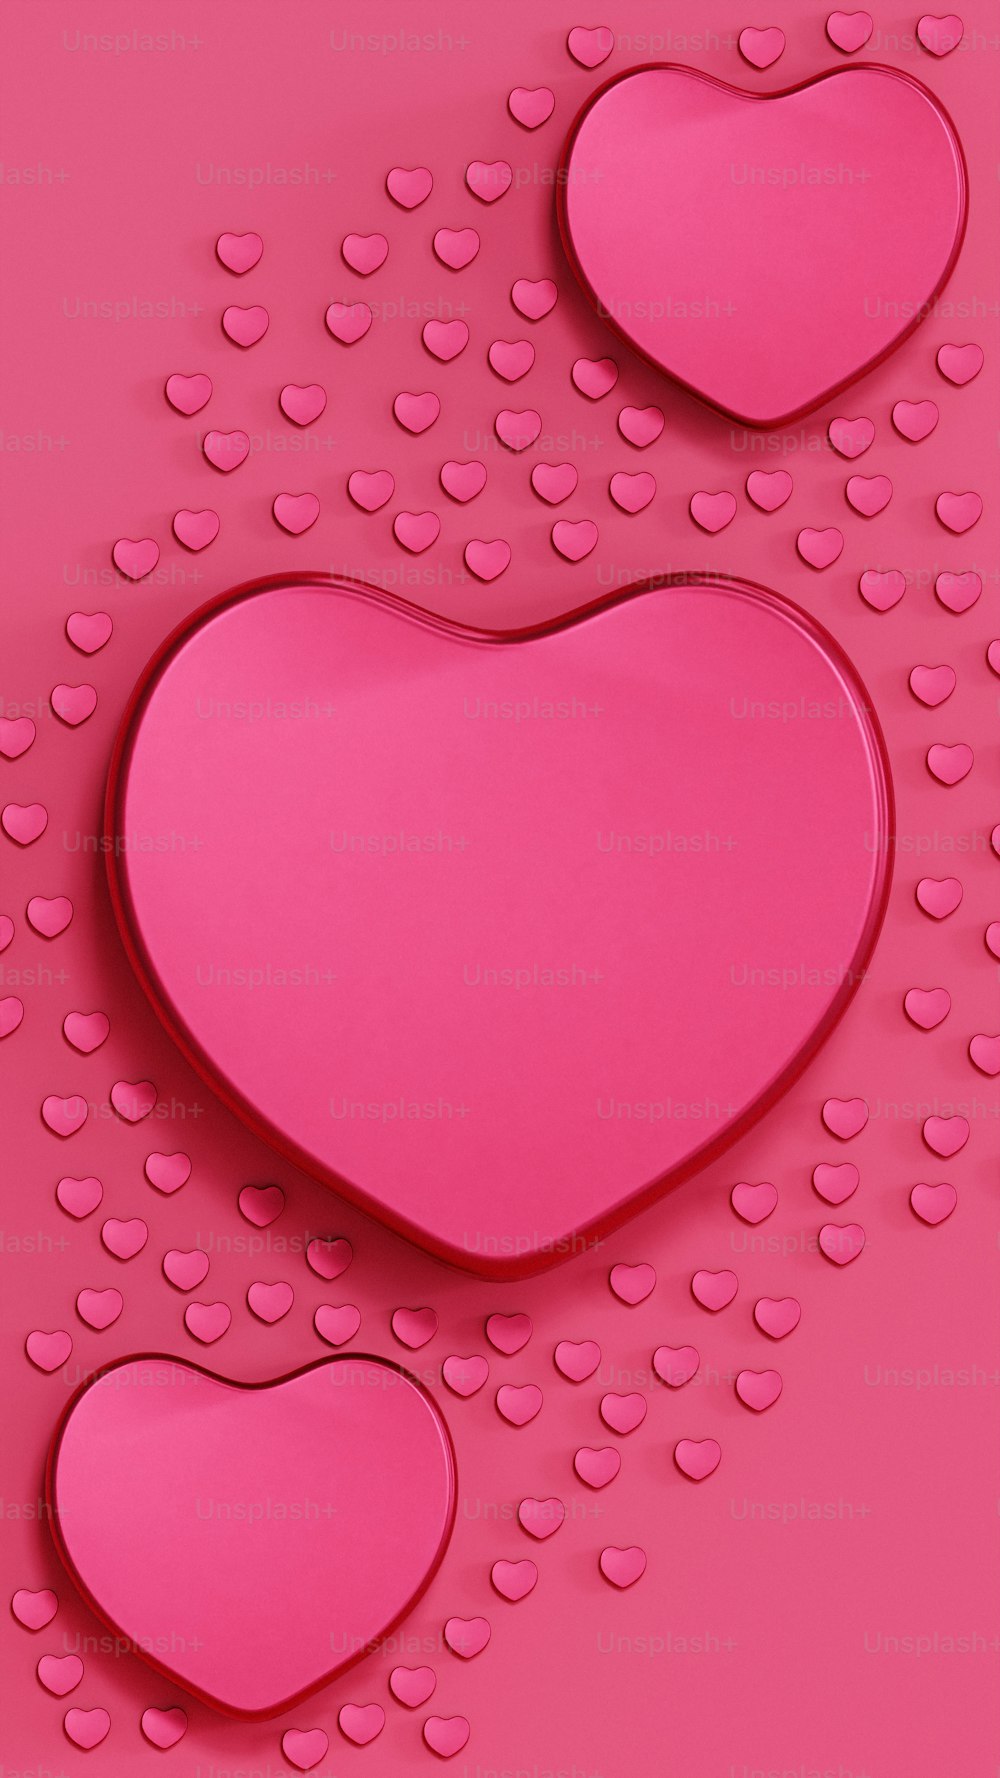 pink heart wallpaper for iphone